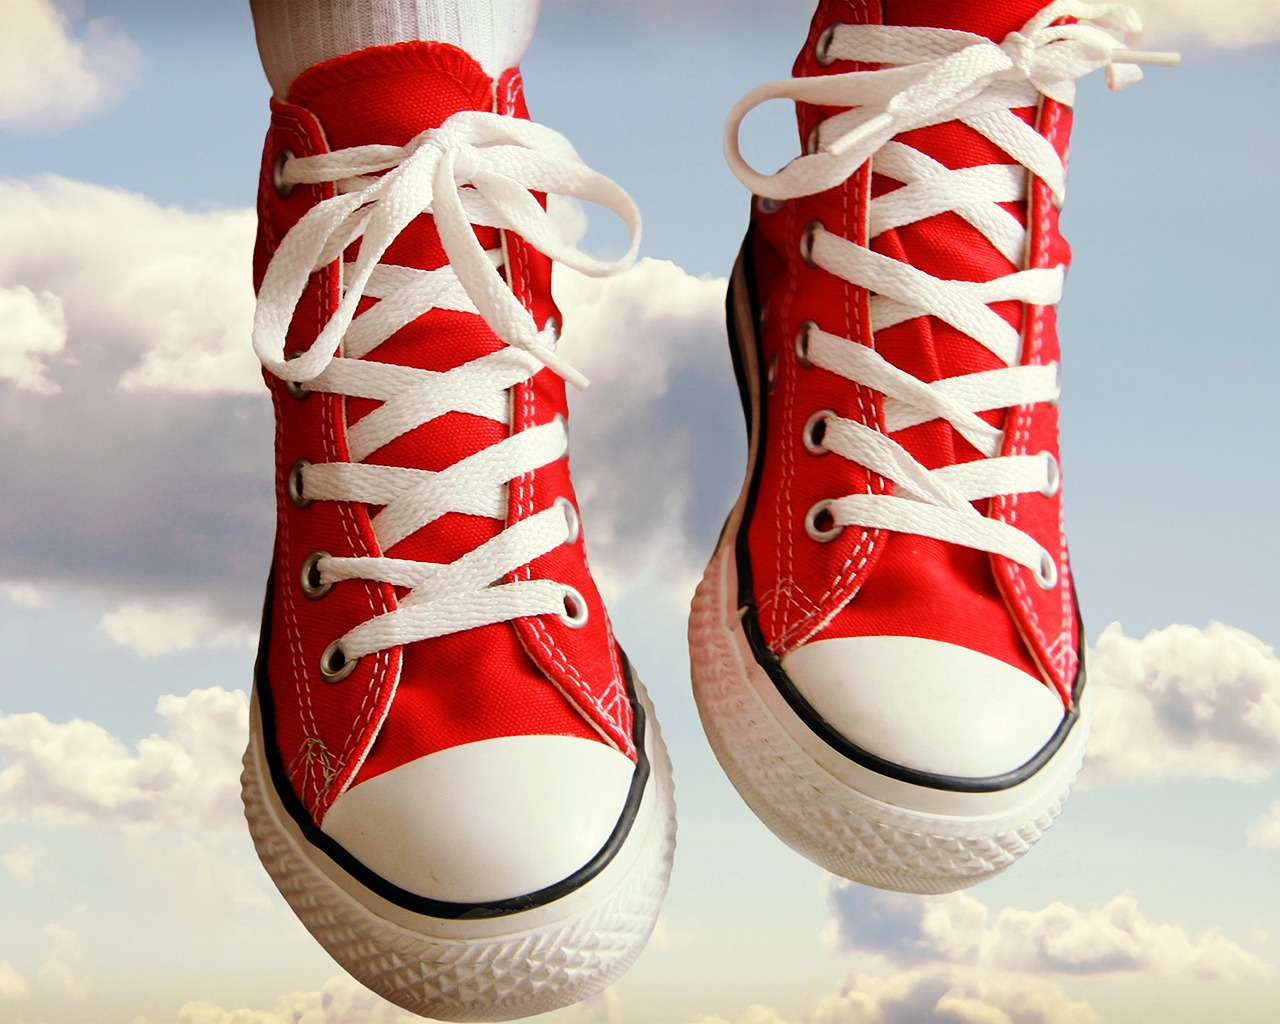 Red Sneakers for 1280 x 1024 resolution